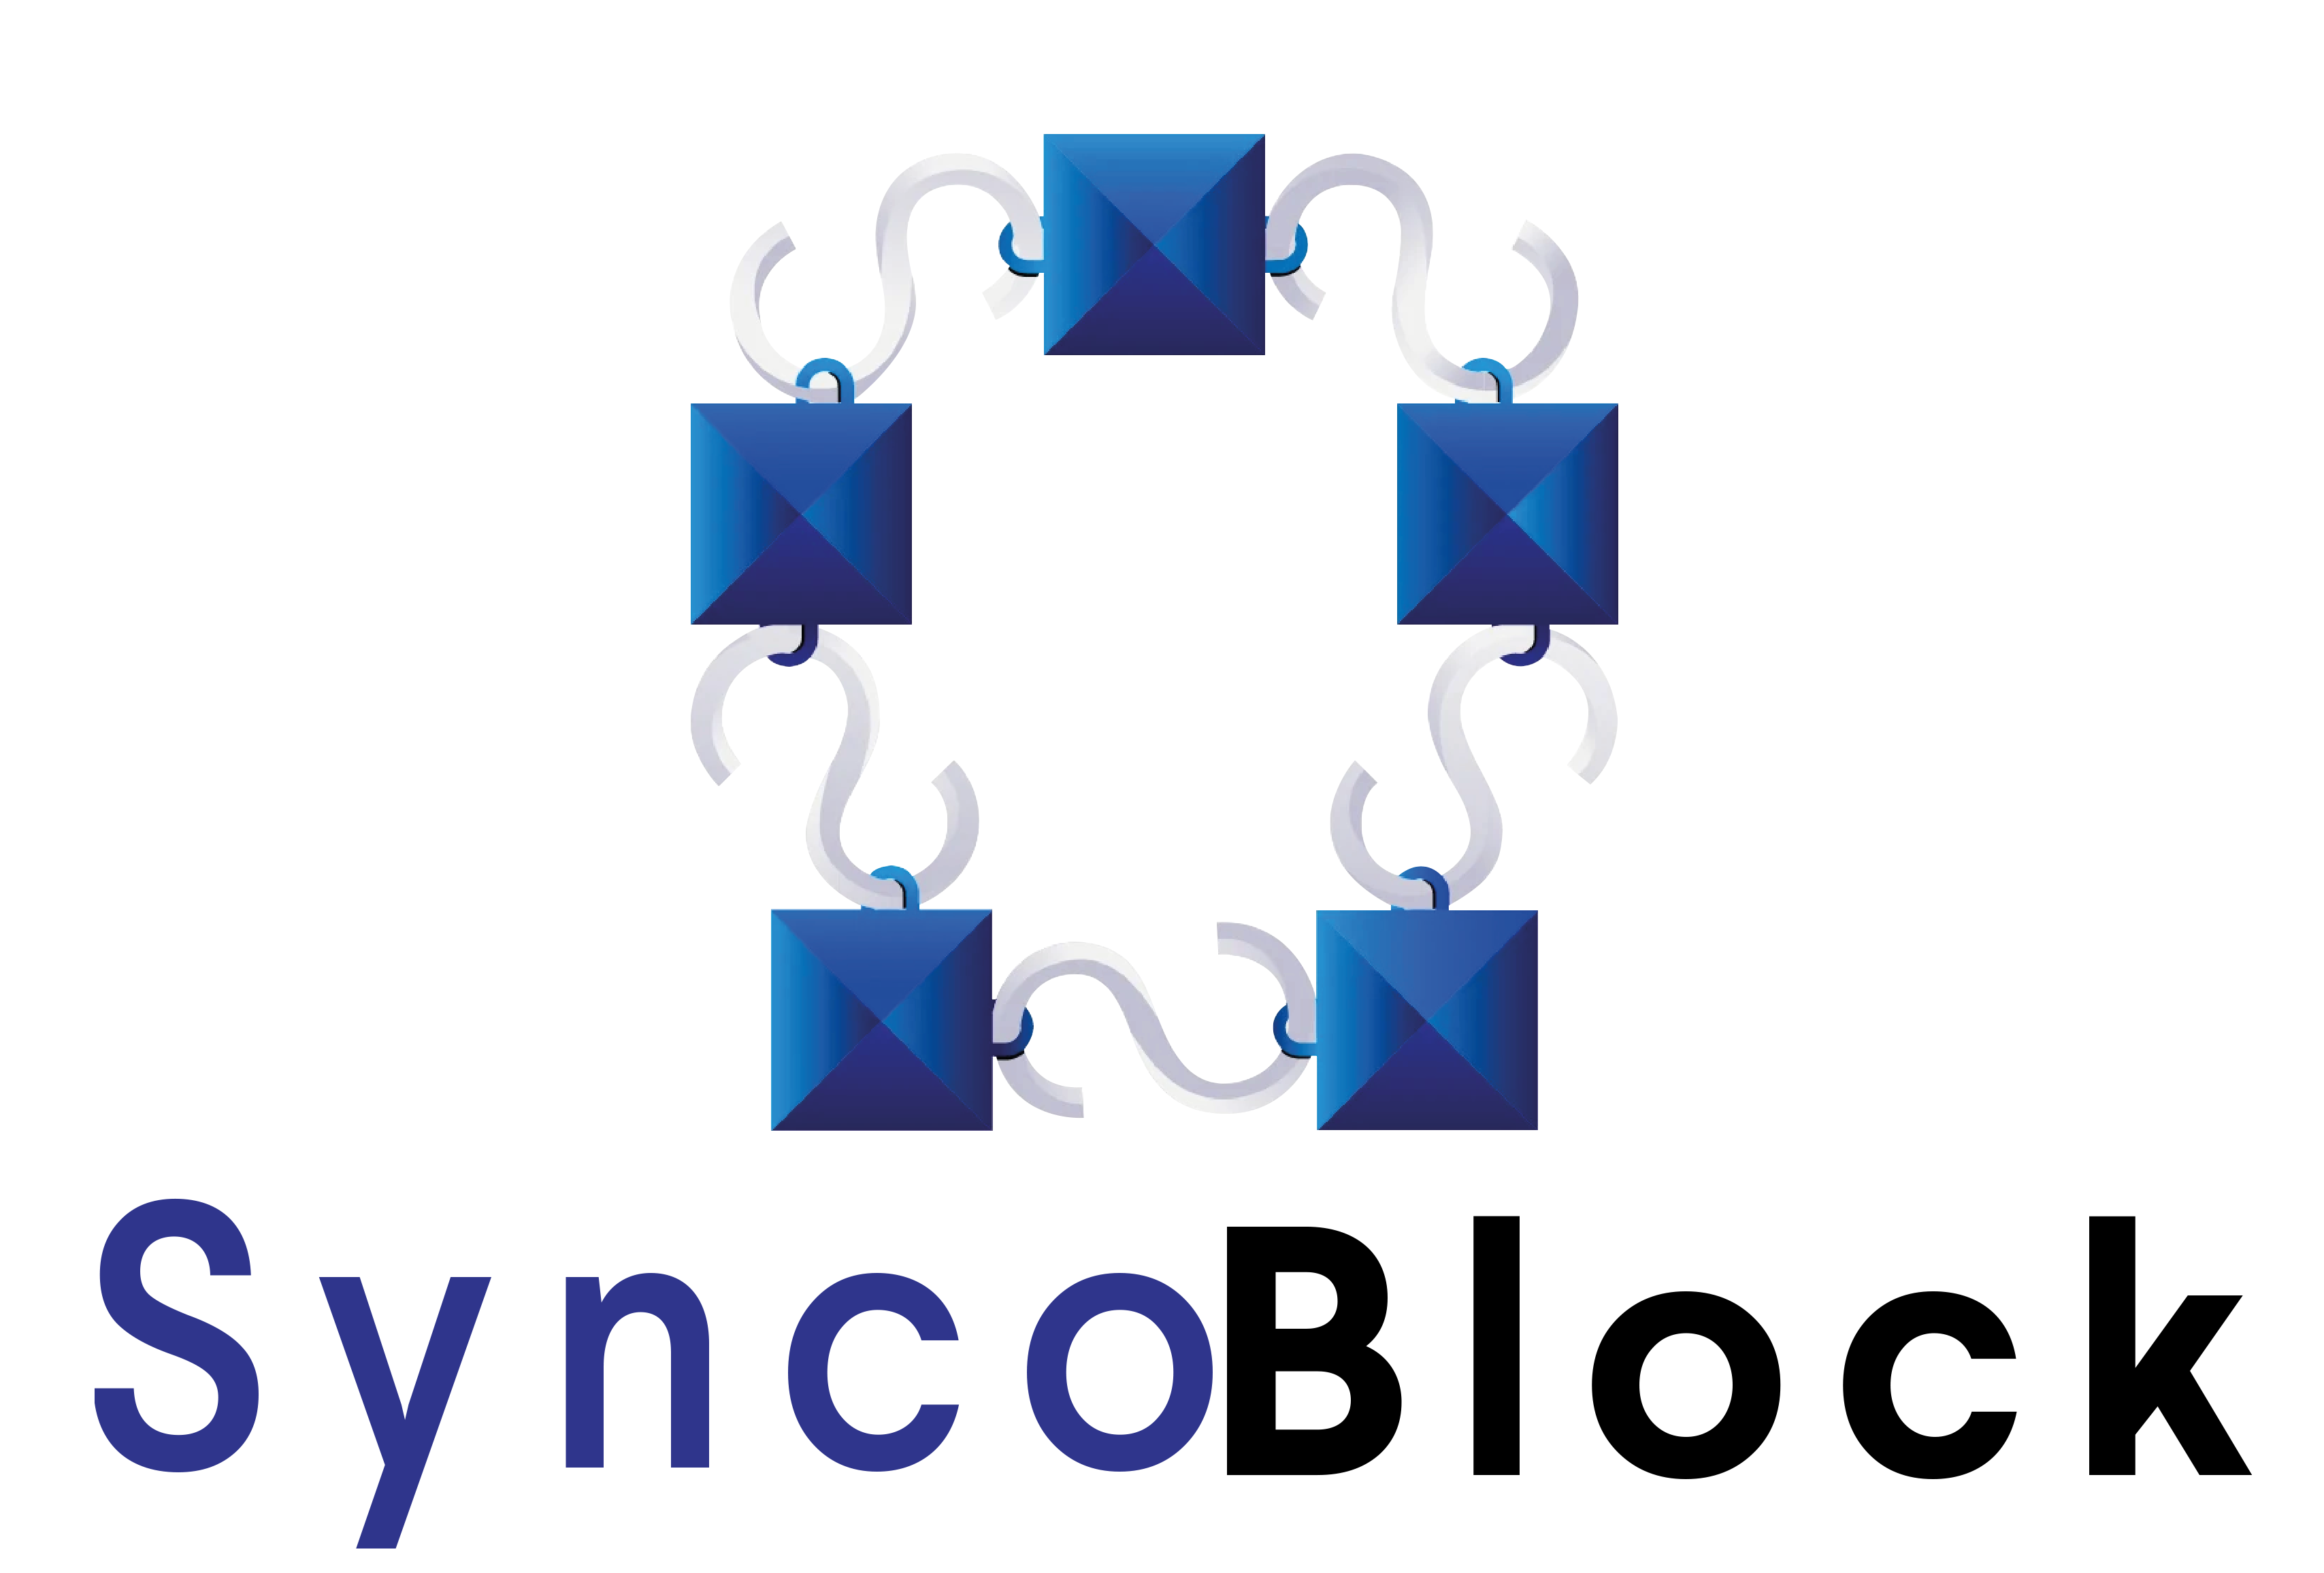 A logo of SyncoBlock